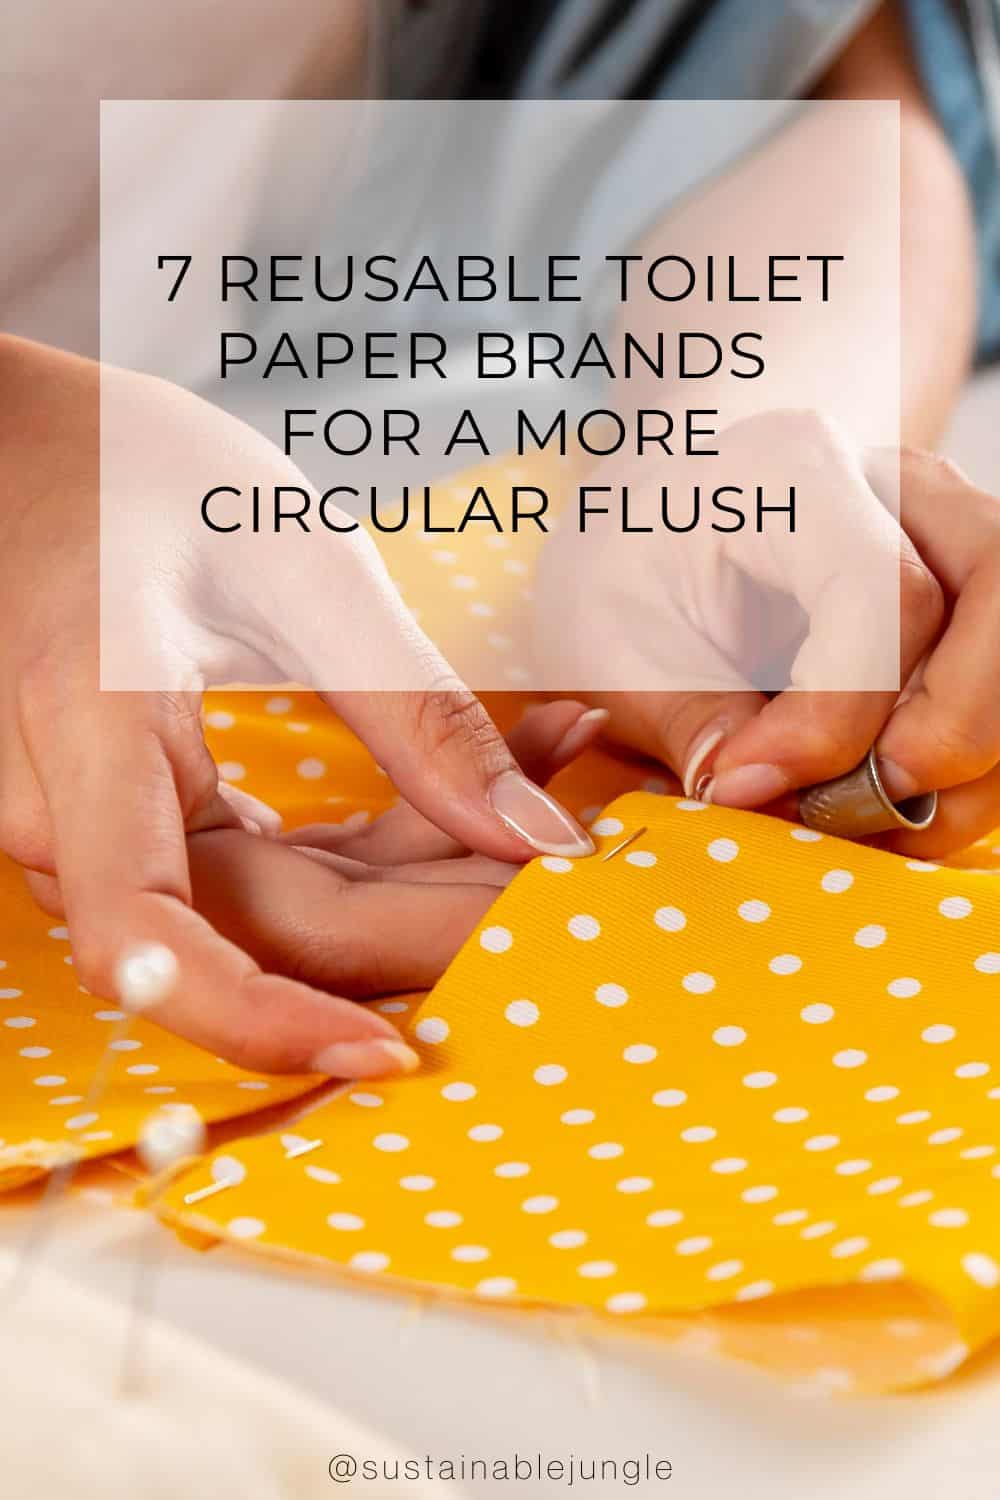 7 Reusable Toilet Paper Brands For a More Circular Flush Image by florentina mhada's images #reusabletoiletpaper #reusableclothingtoiletpaper #cloethtoiletpaper #familycloth #whatisfamilycloth #sustainablejungle